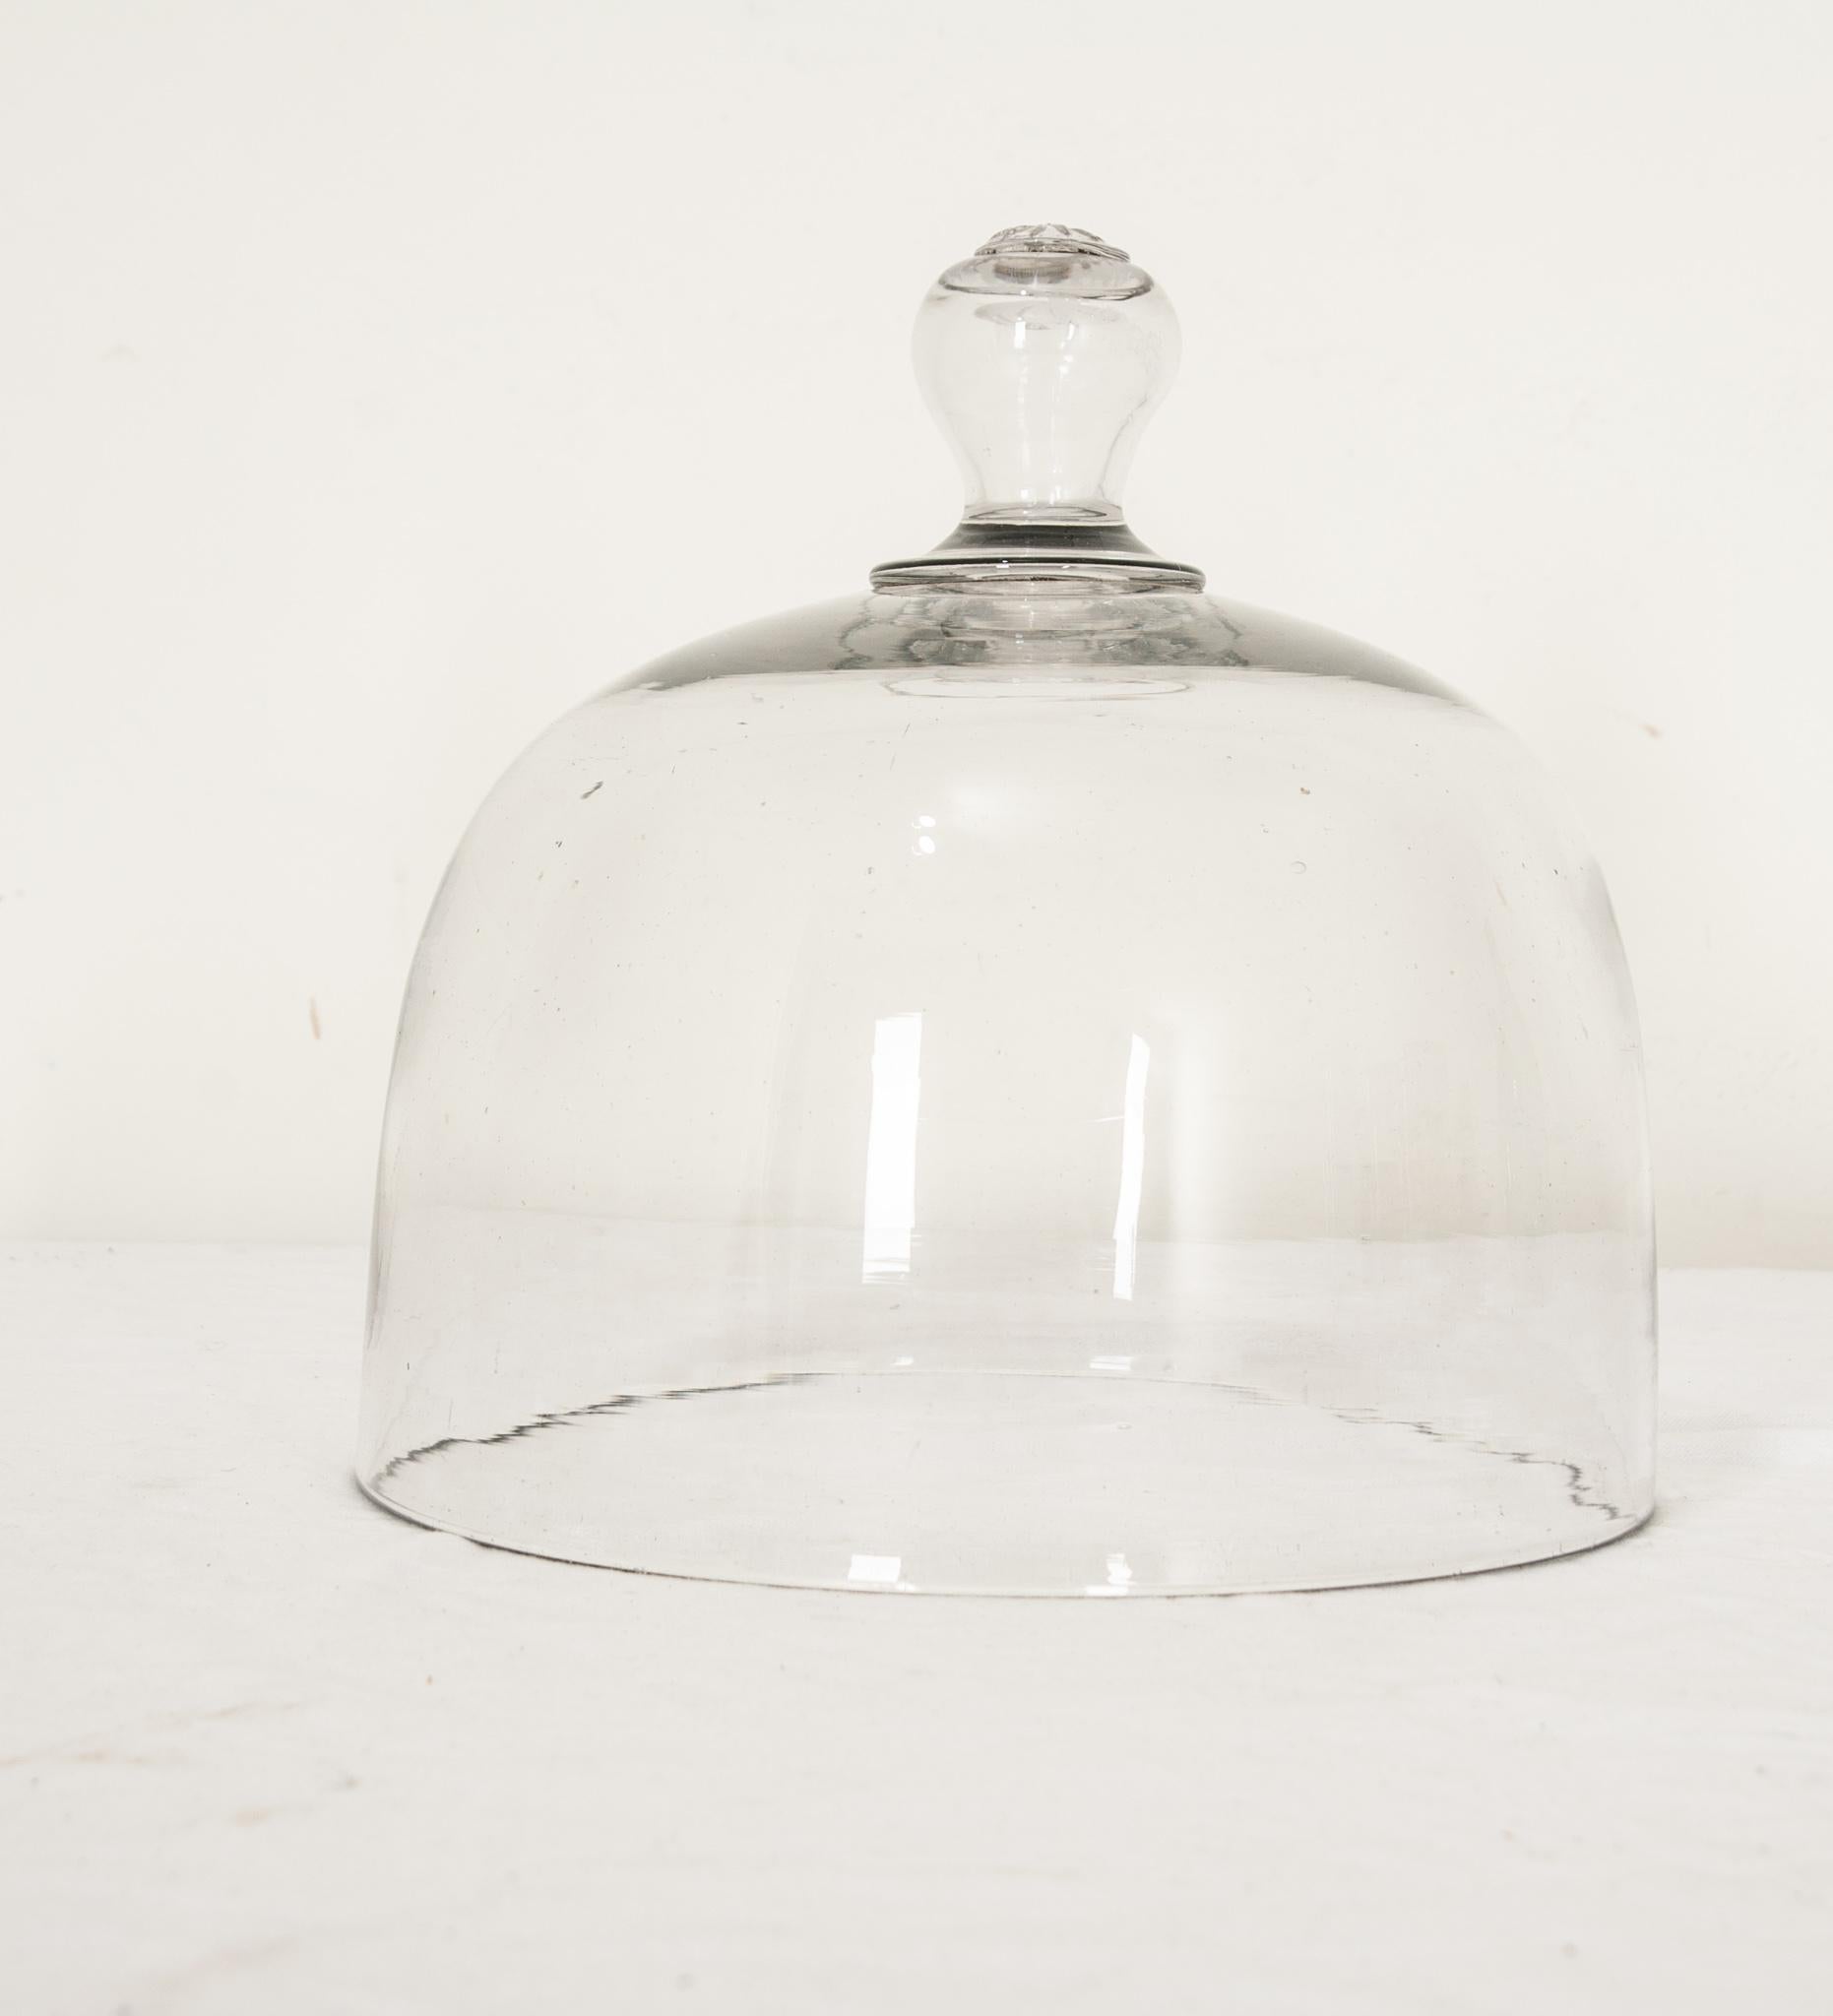 Vintage French diminutive clear glass cheese or cake dome. This dome of lovely hand-blown glass is perfect for displaying fruits, small cakes, cheeses, or breads. Can be paired with a cutting board or antique china. Perfect for showcasing petite